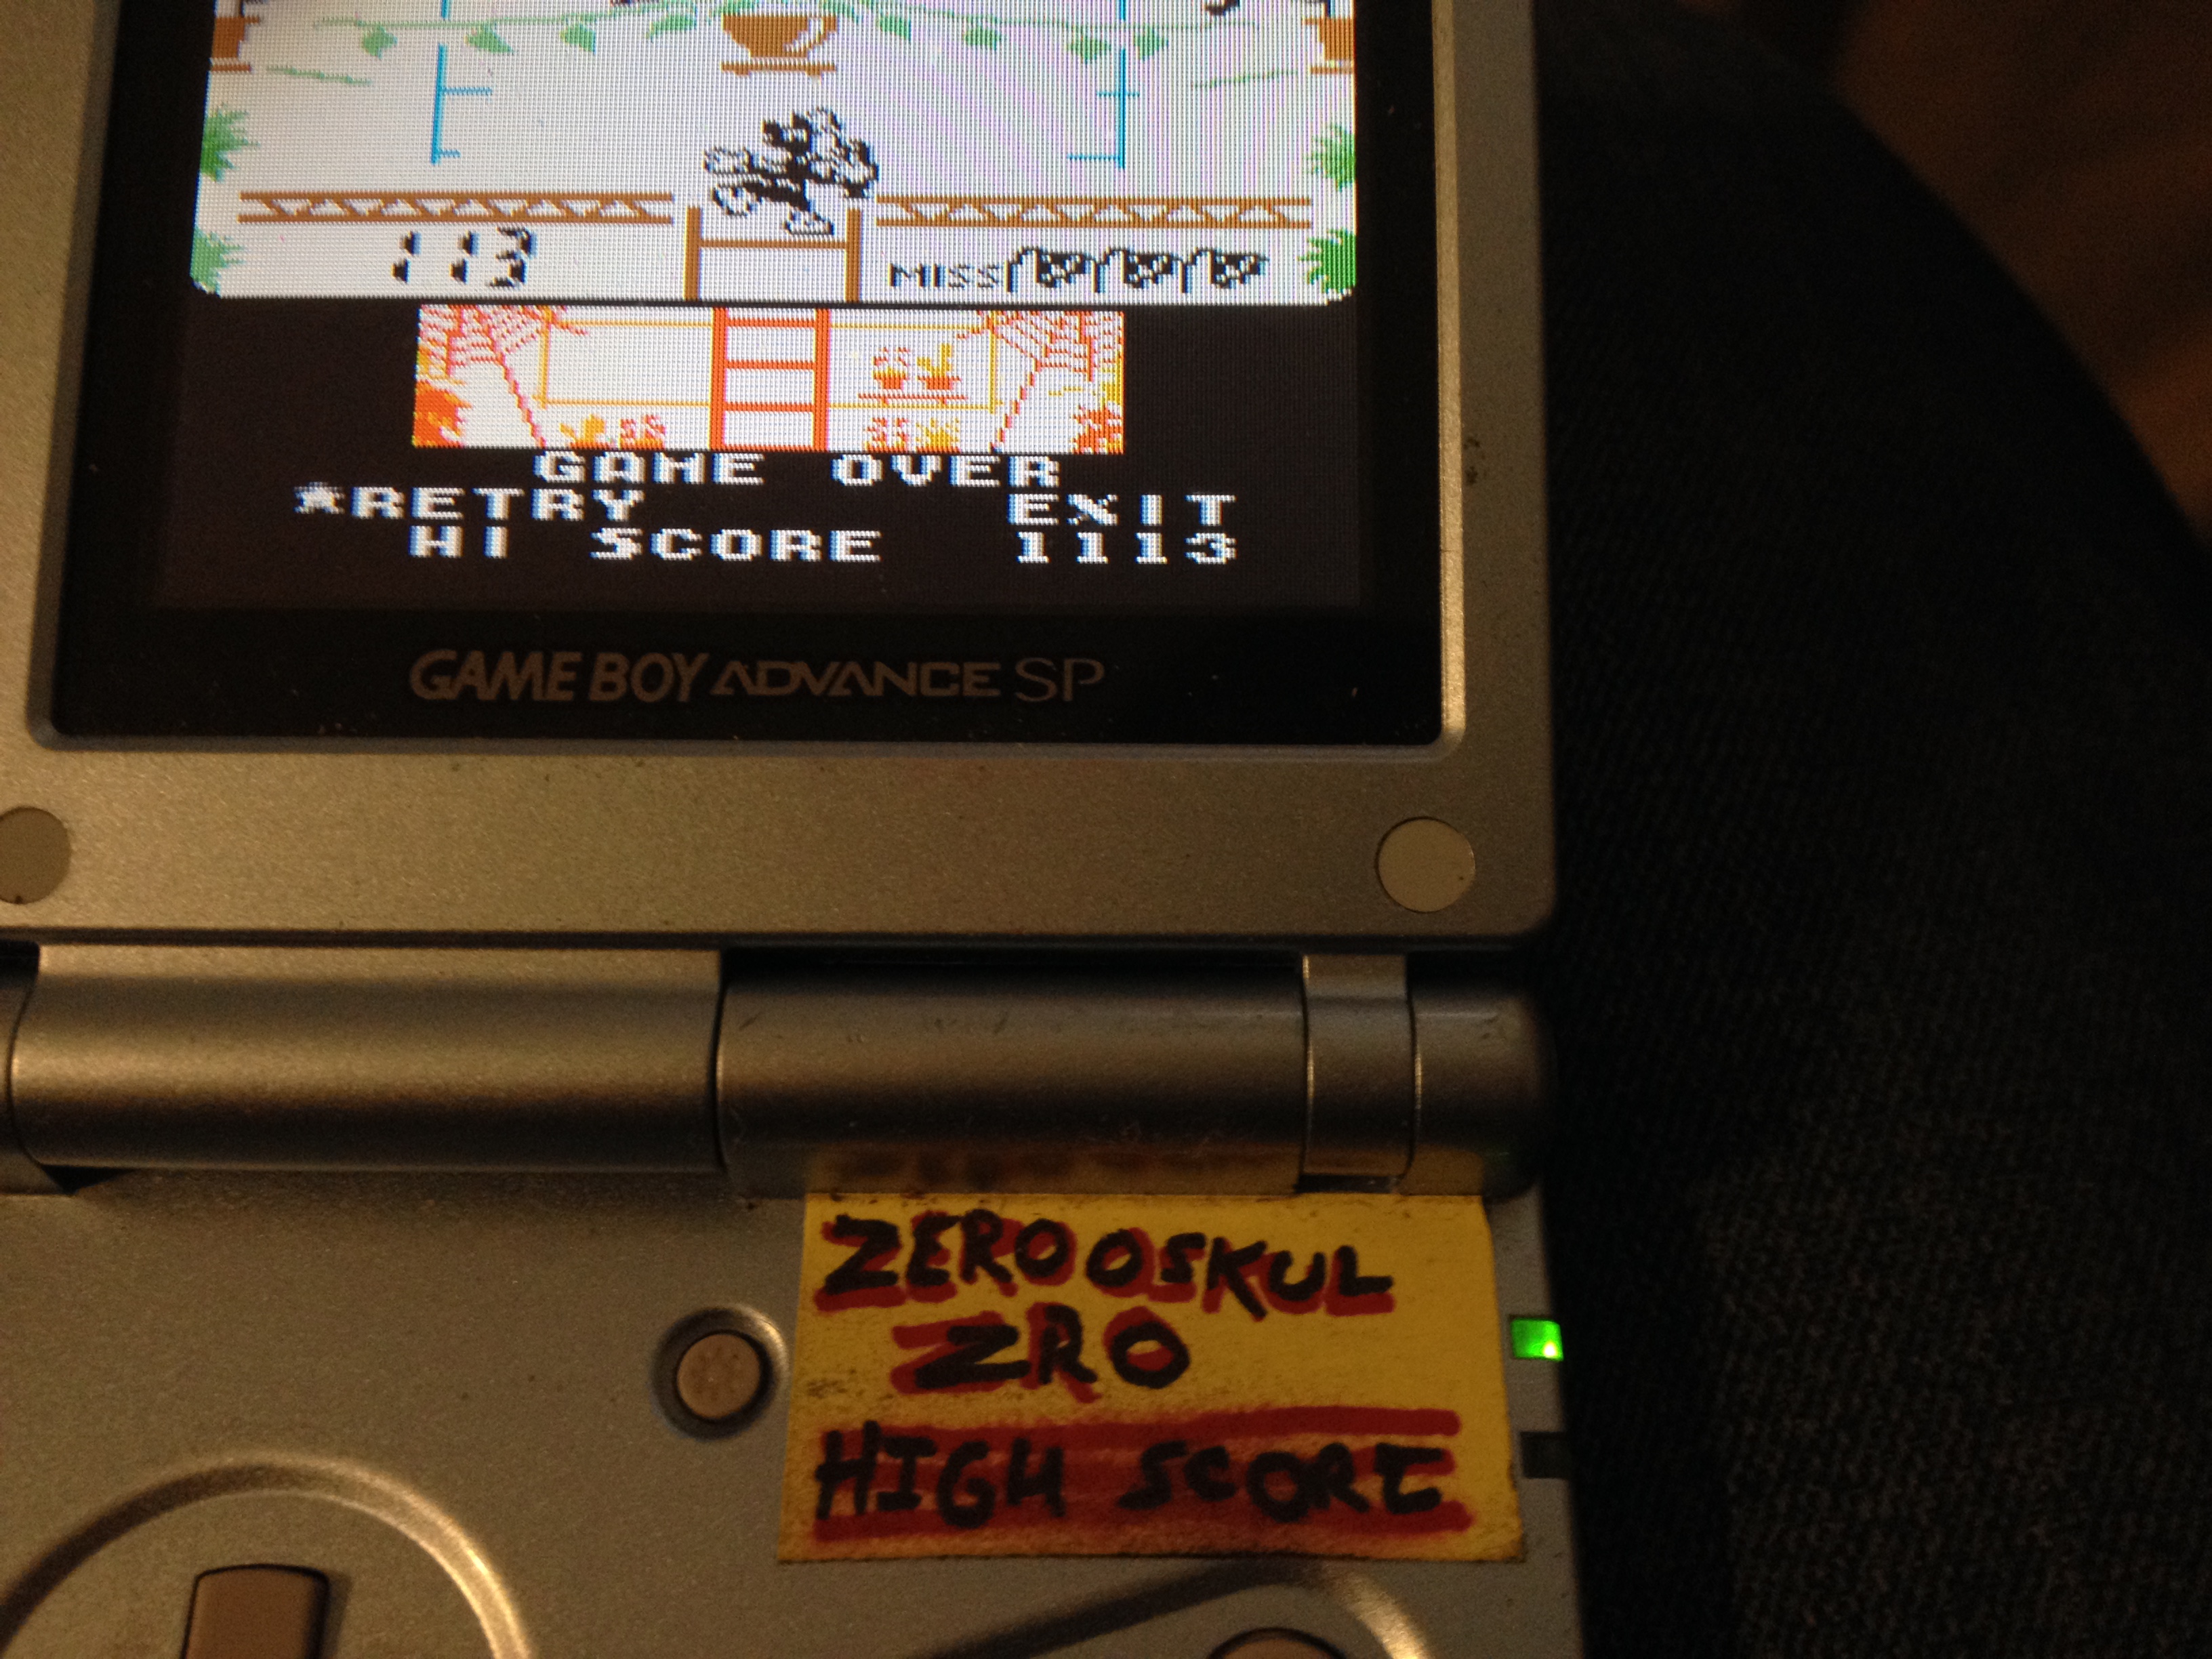 zerooskul: Game & Watch Gallery 3: Greenhouse: Classic: Hard (Game Boy Color) 1,113 points on 2019-04-26 17:23:33